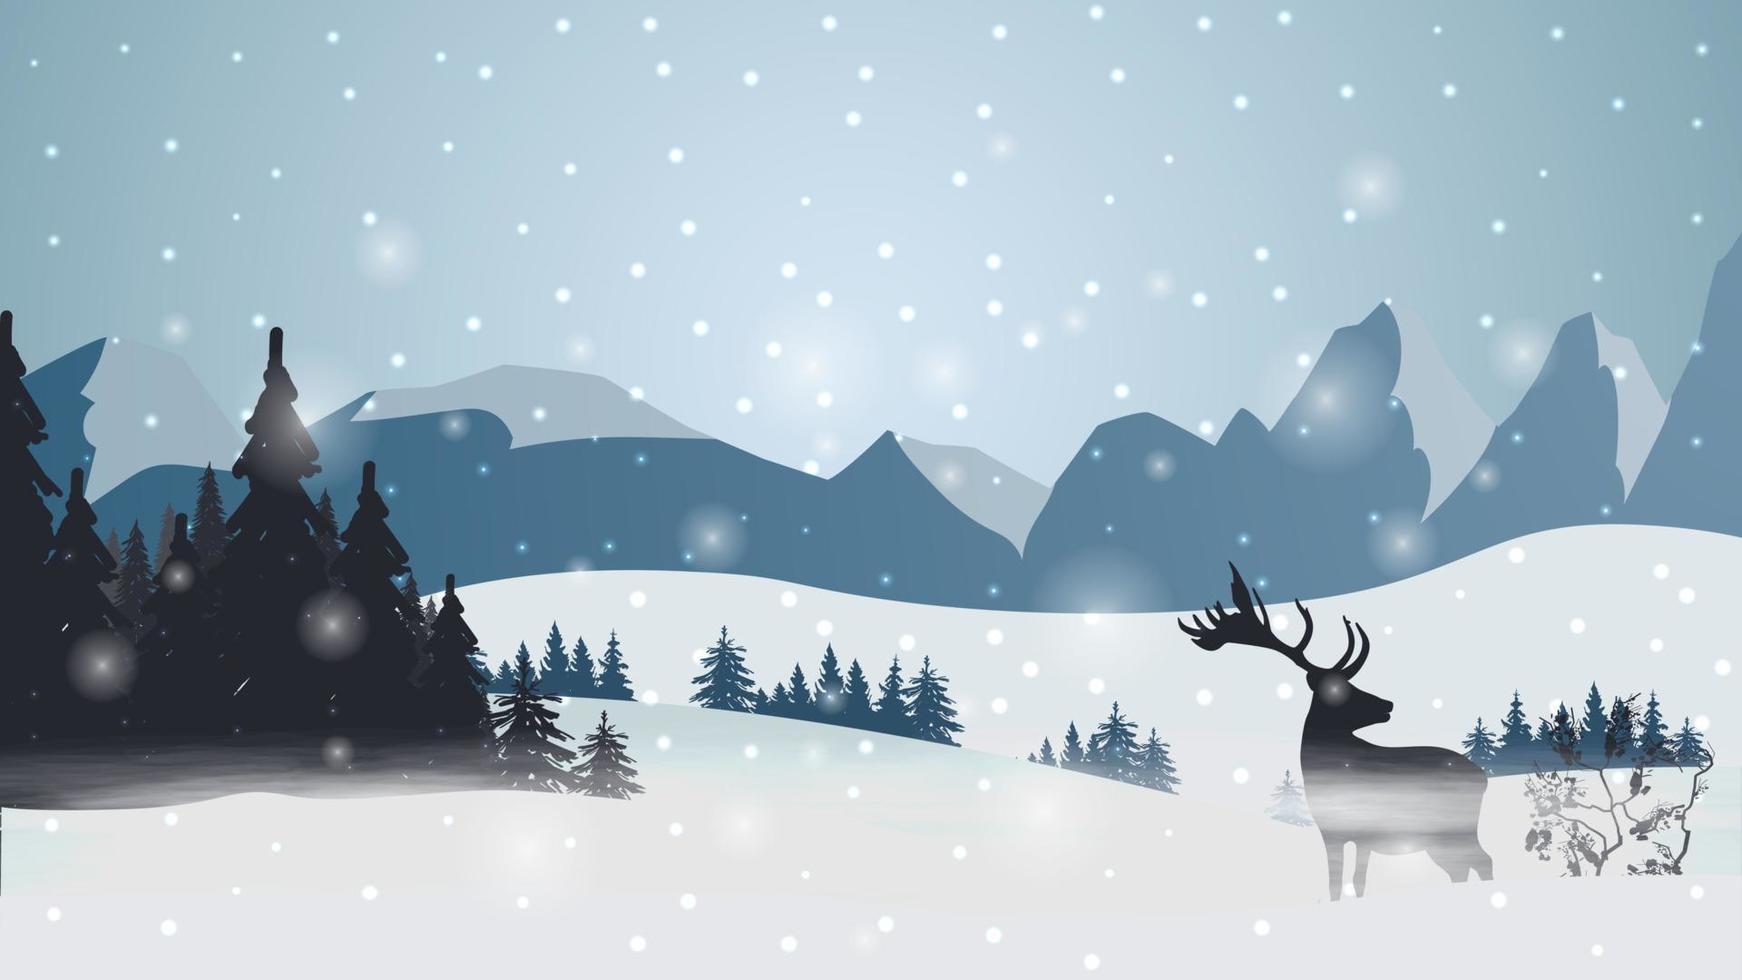 Winter landscape with high mountains on the horizon, pines, forest, snow falling and silhouette of deer vector